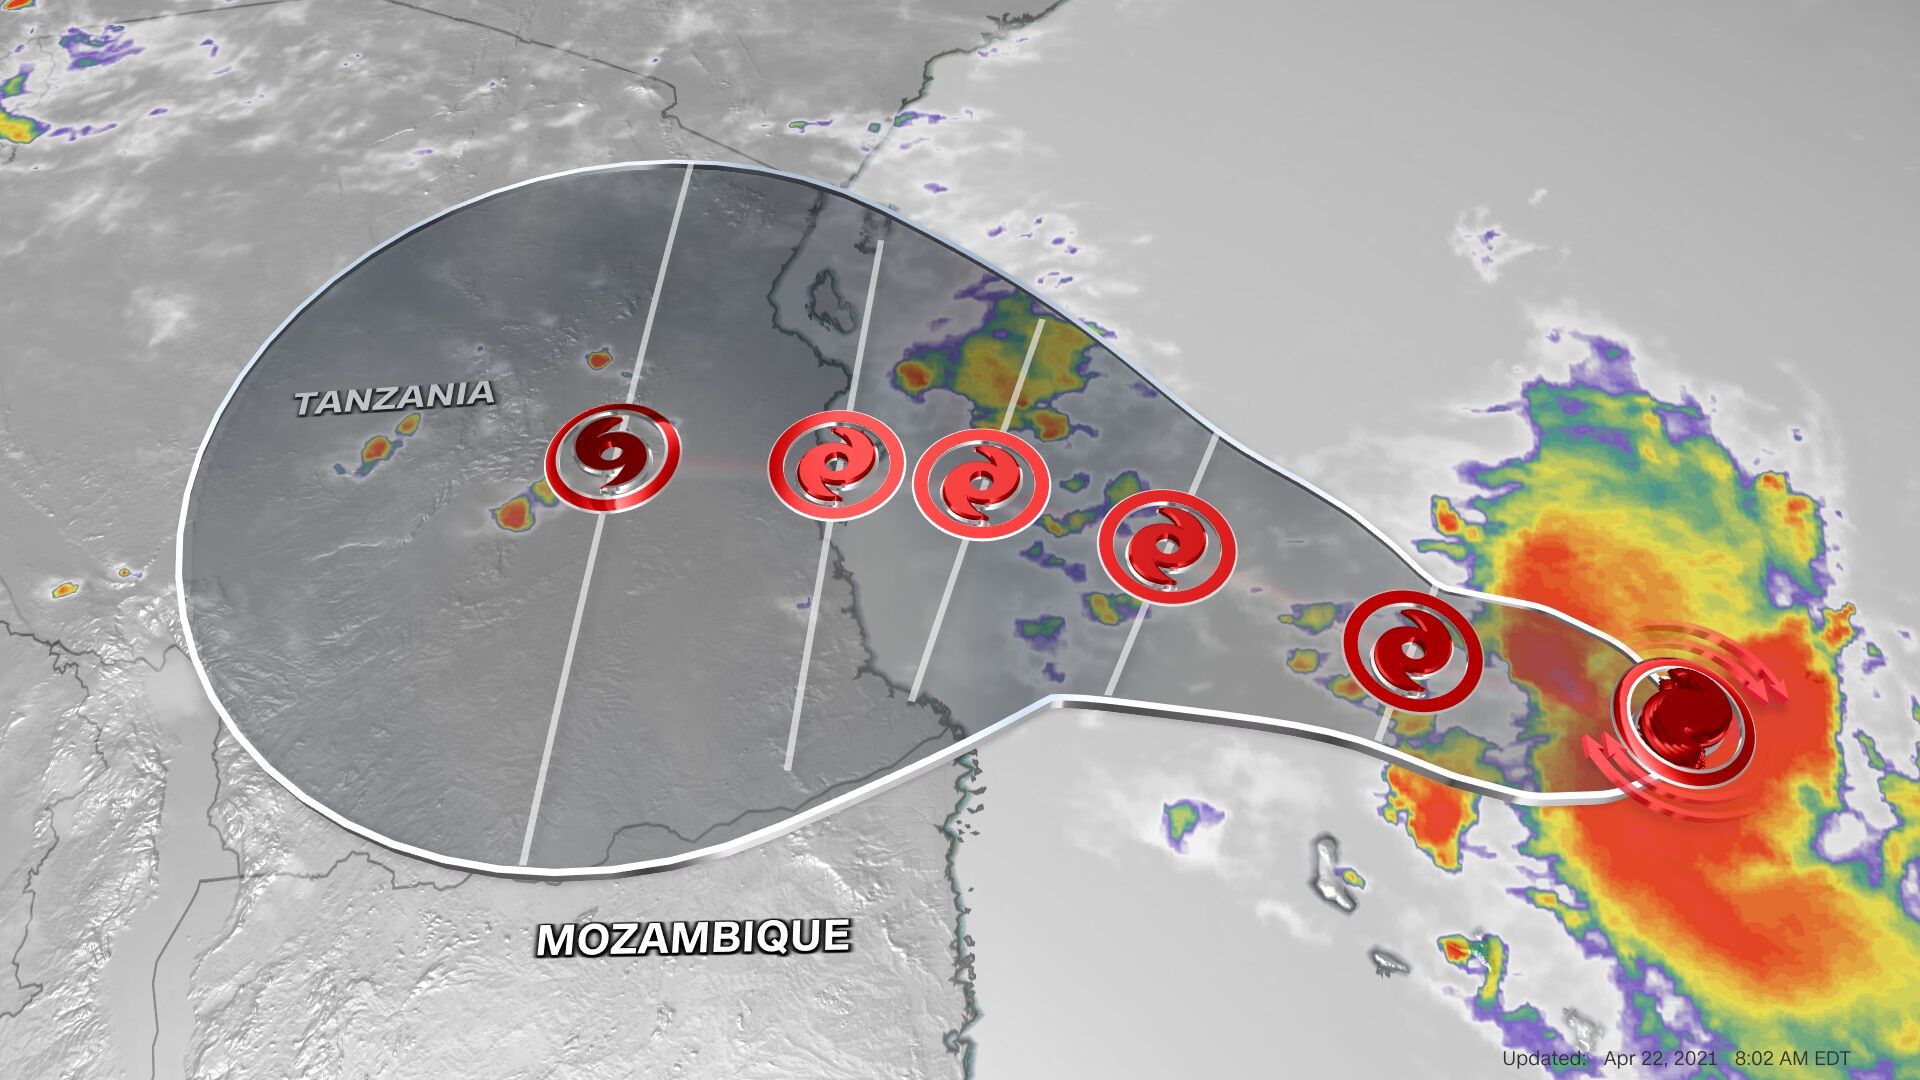 A rare tropical cyclone is approaching one of Africa’s most populated